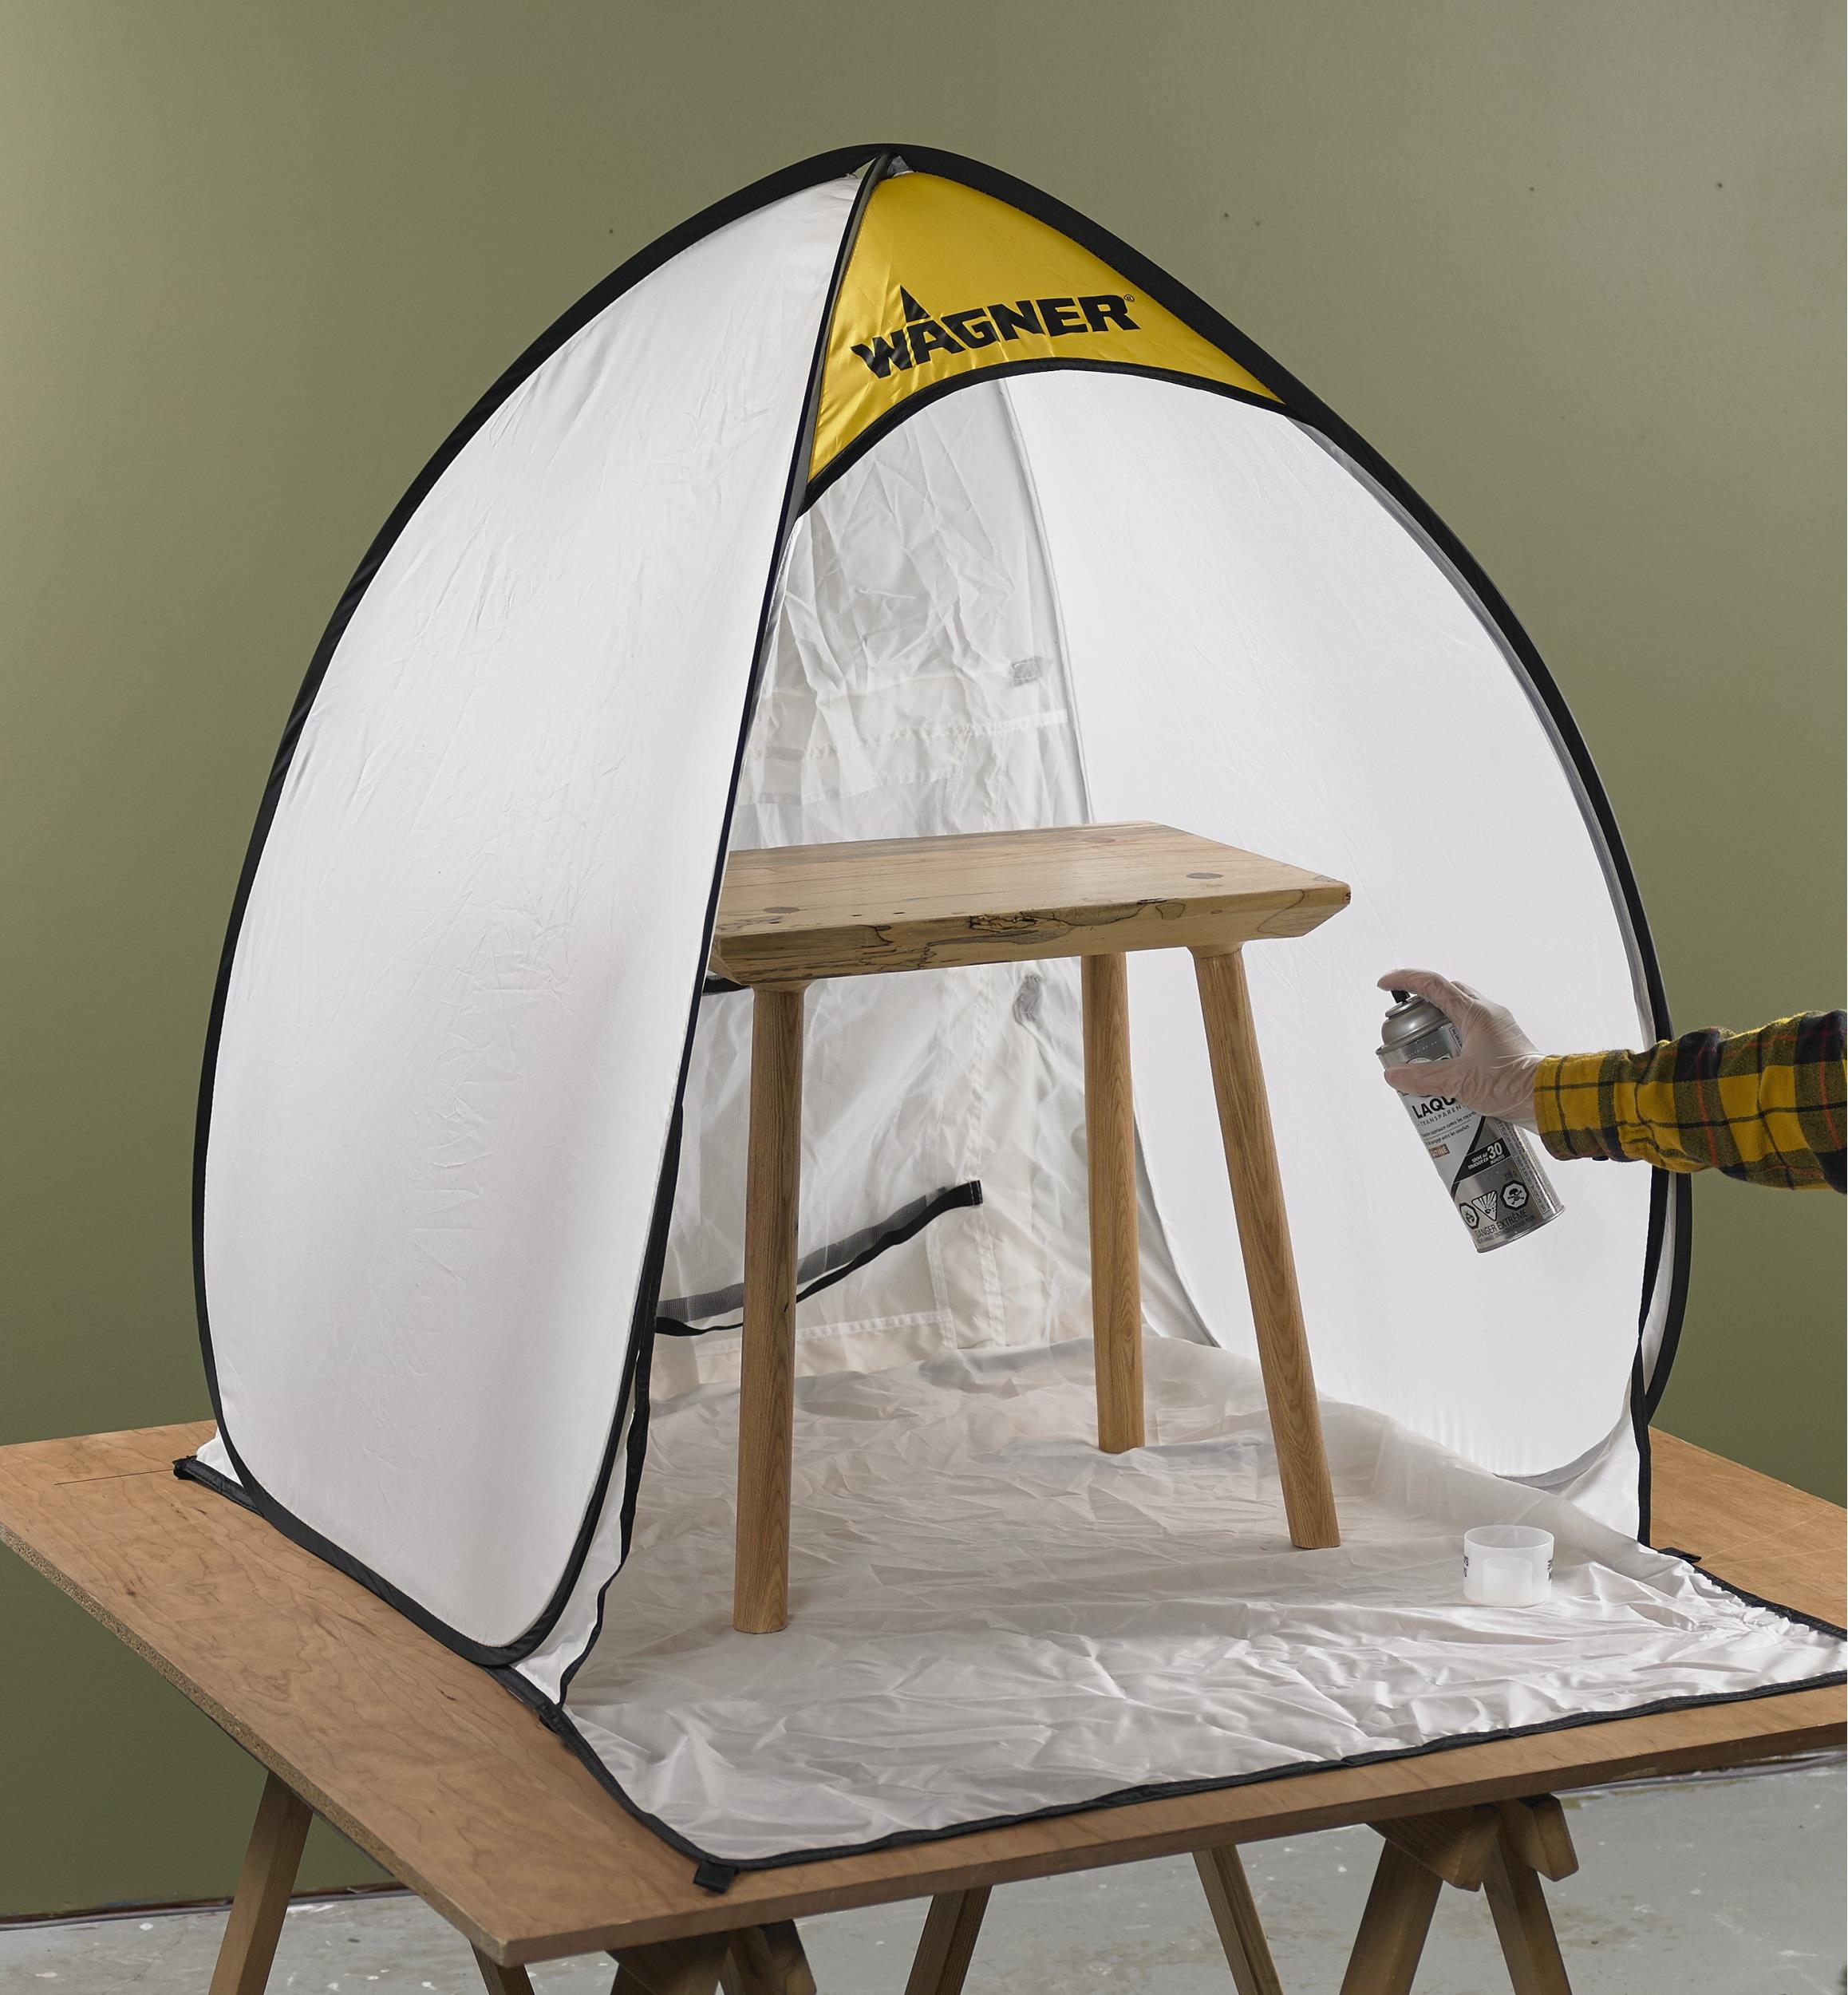 Portable Spray Shelters - Lee Valley Tools